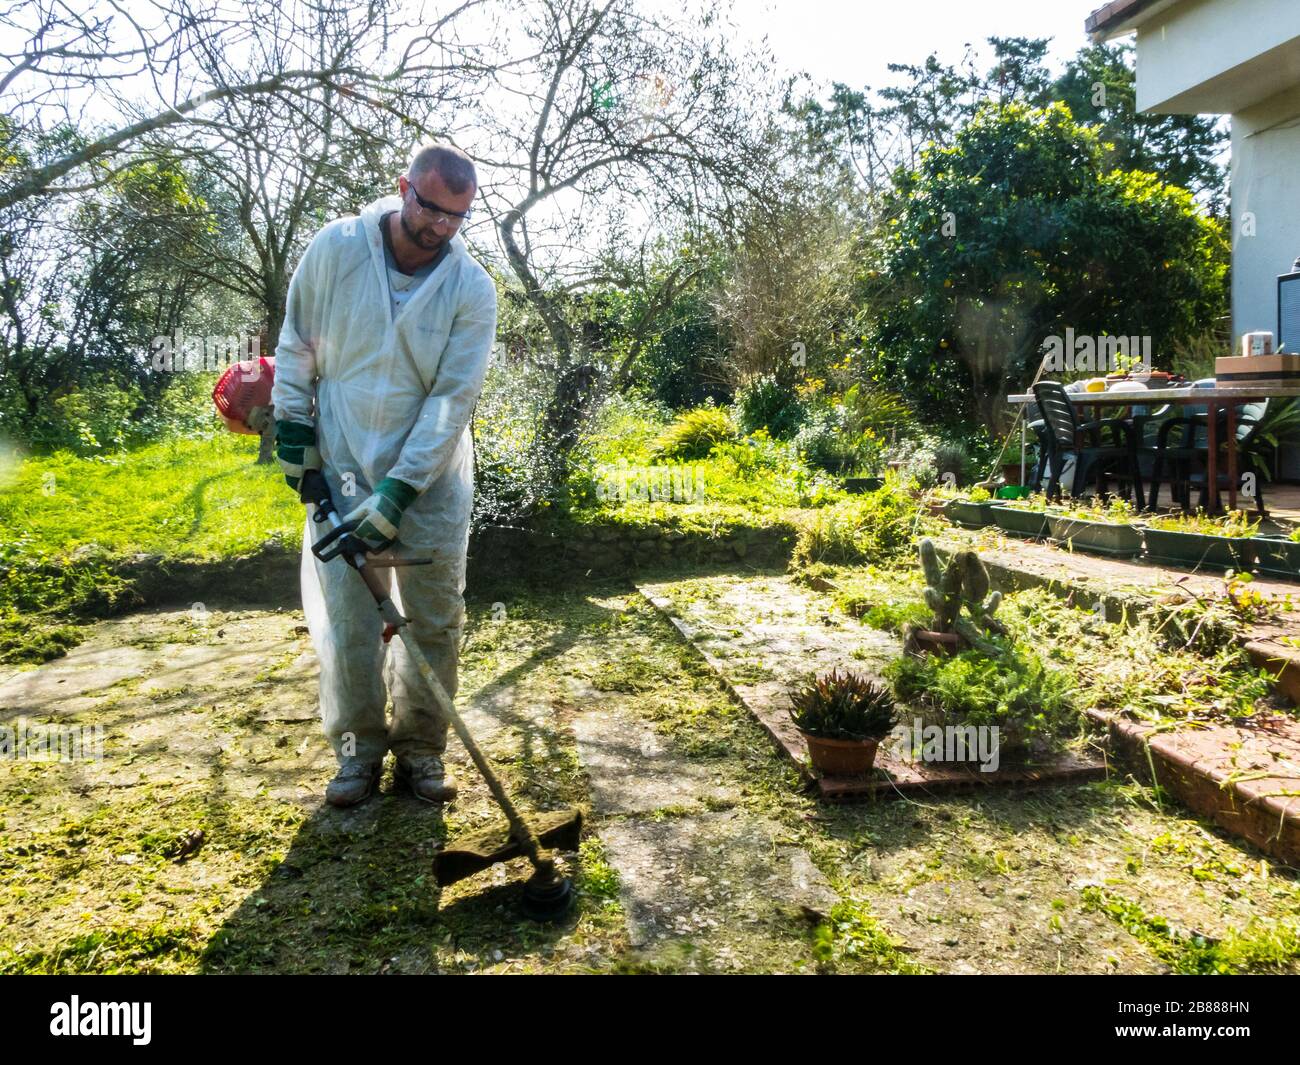 Man wearing a white suit cutting grass the grass in the garden in a sunny day Stock Photo